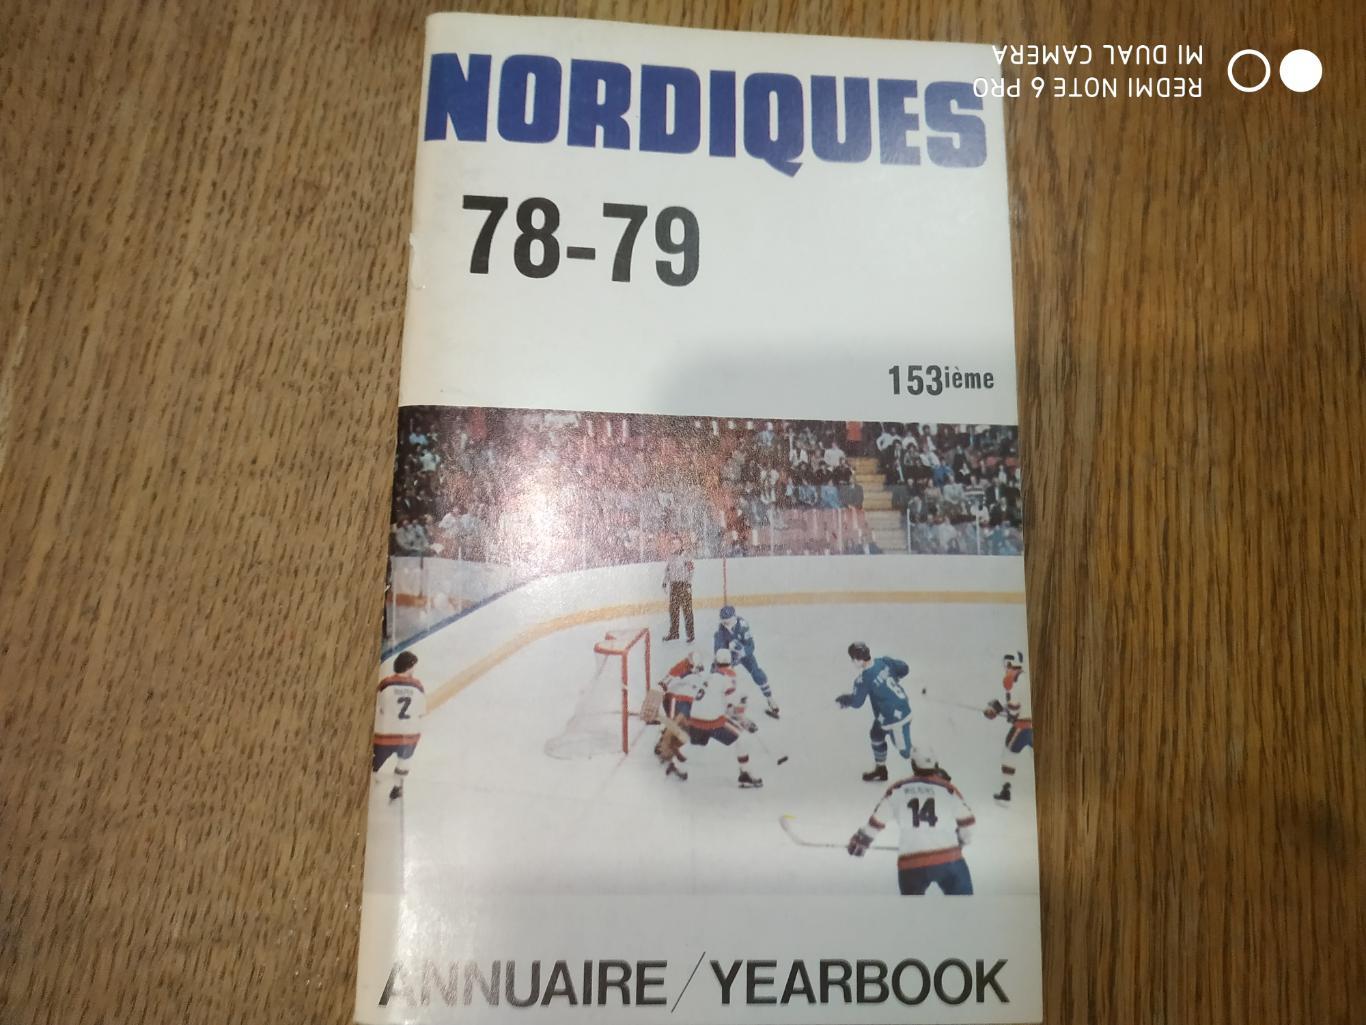 1978-79 NORDIQUES ANNUAIRE YEARBOOK